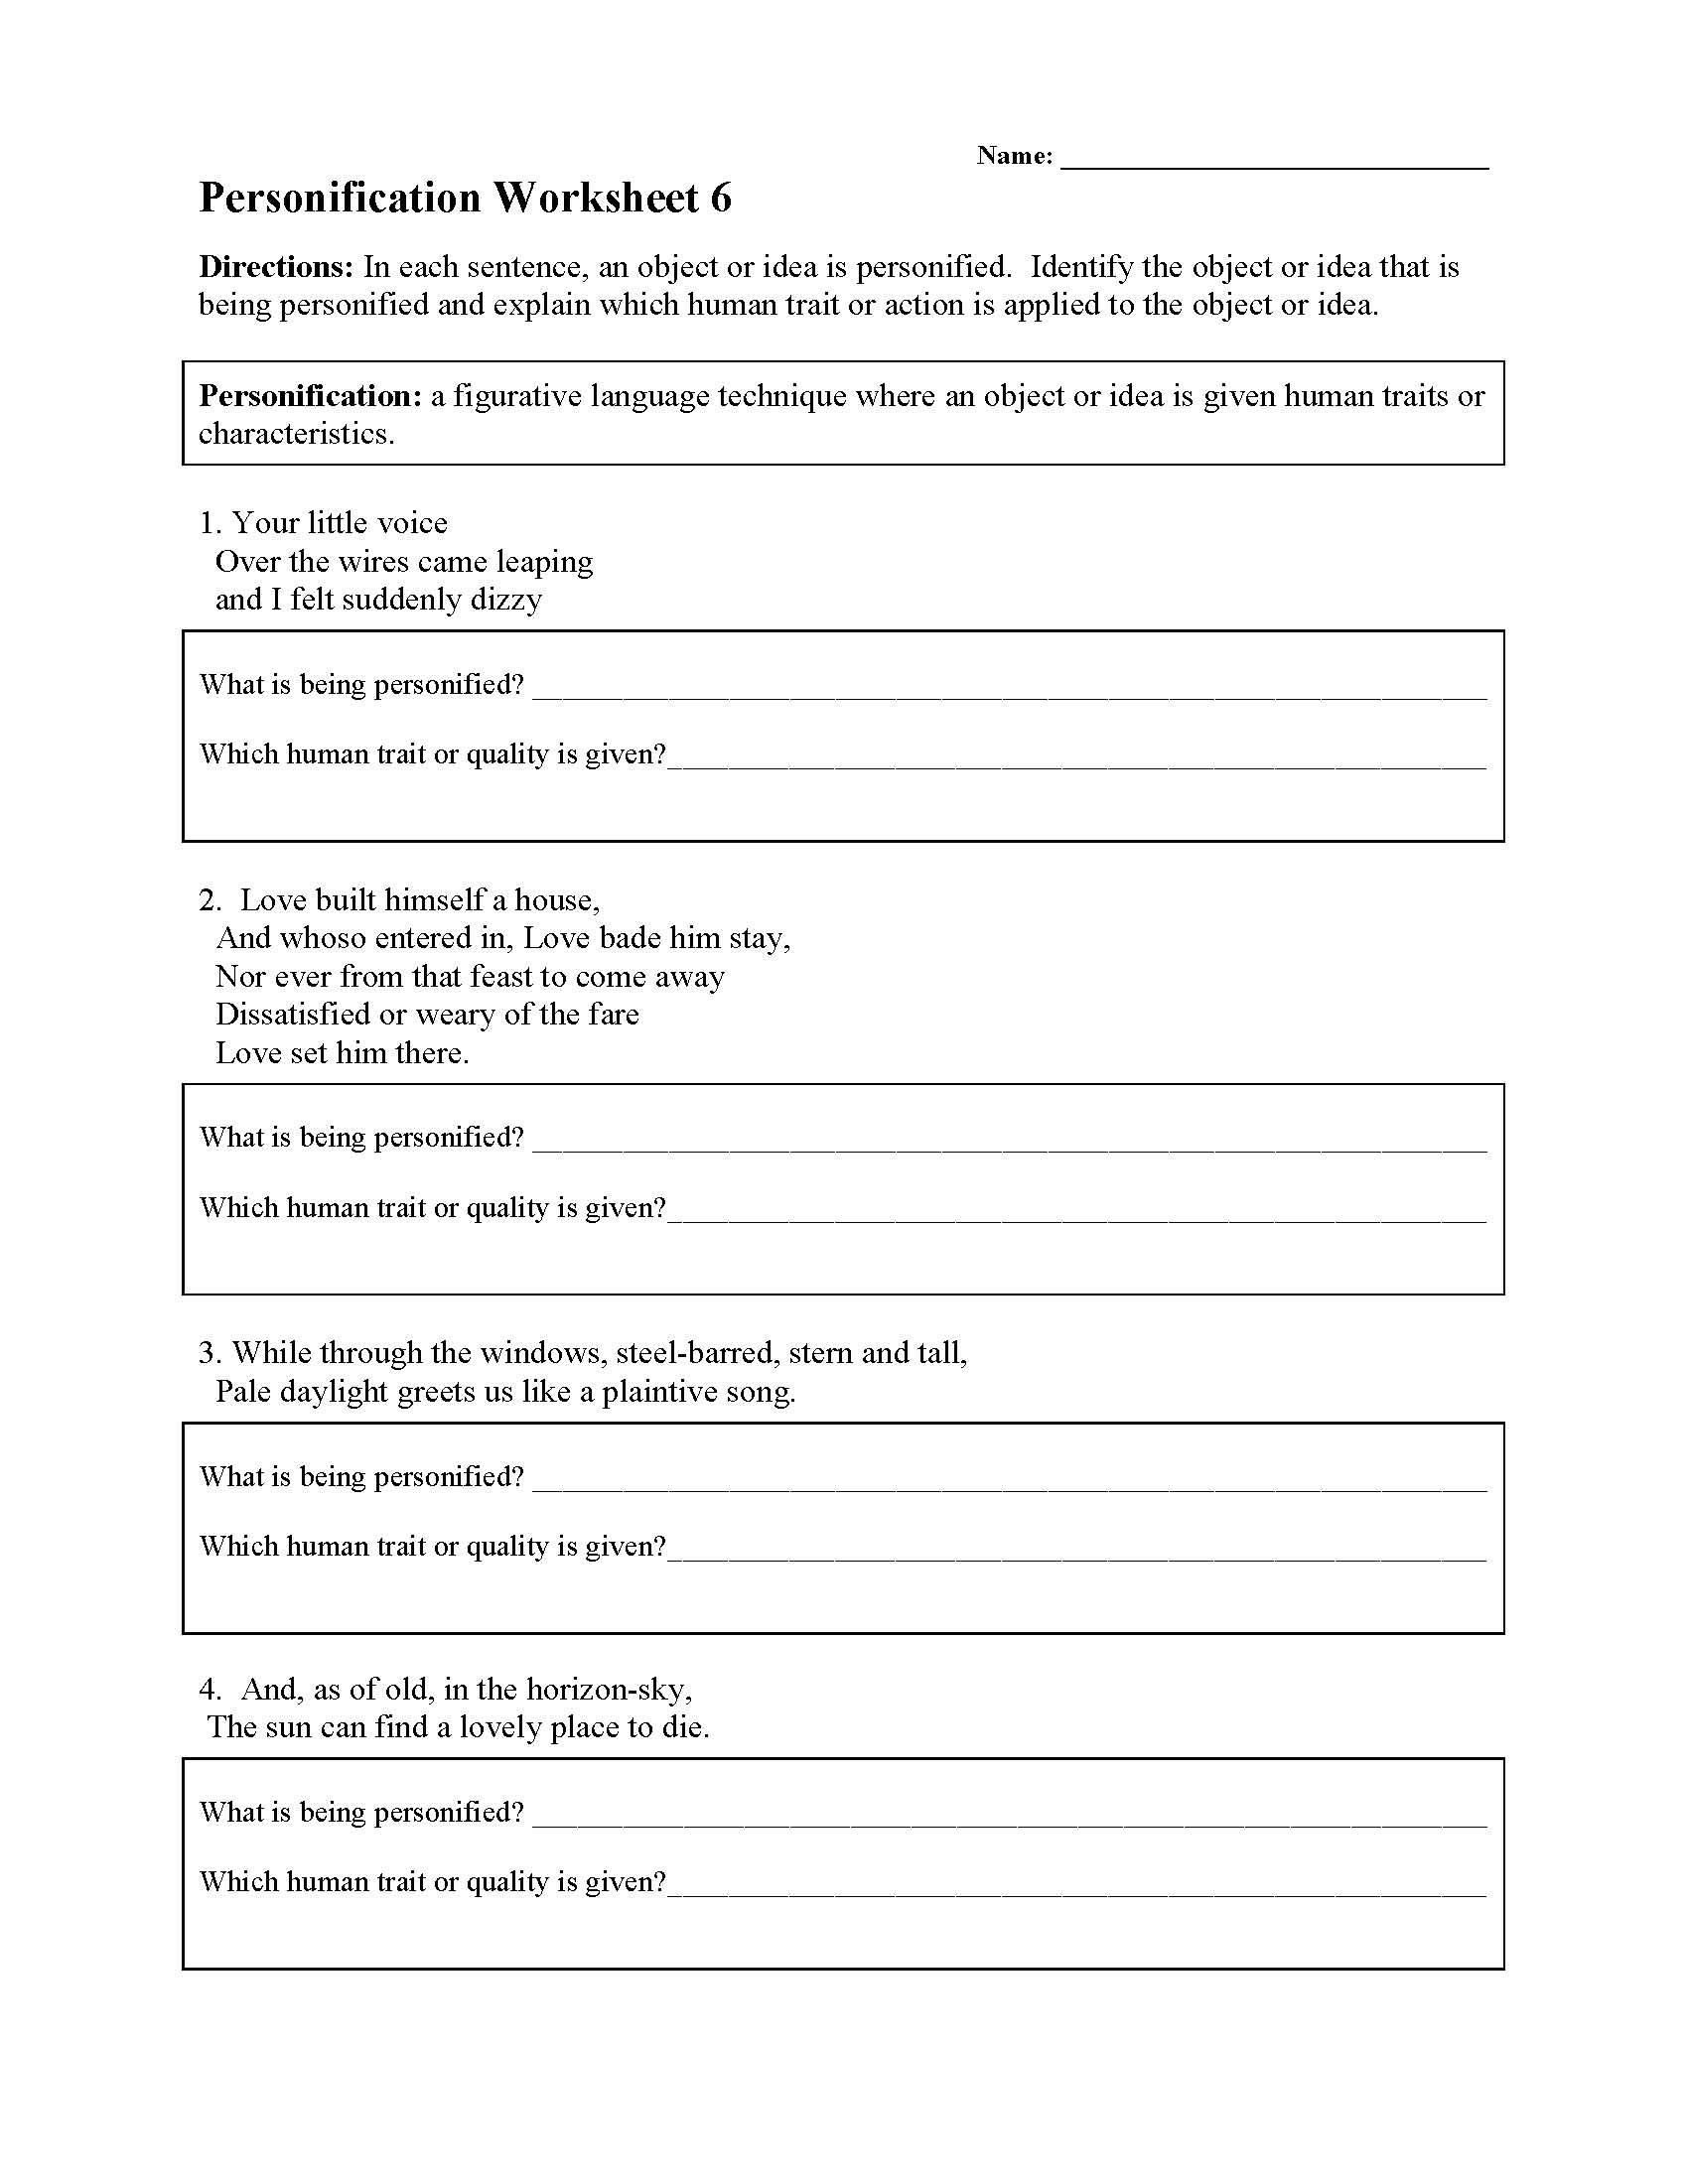 personification-worksheet-6-preview